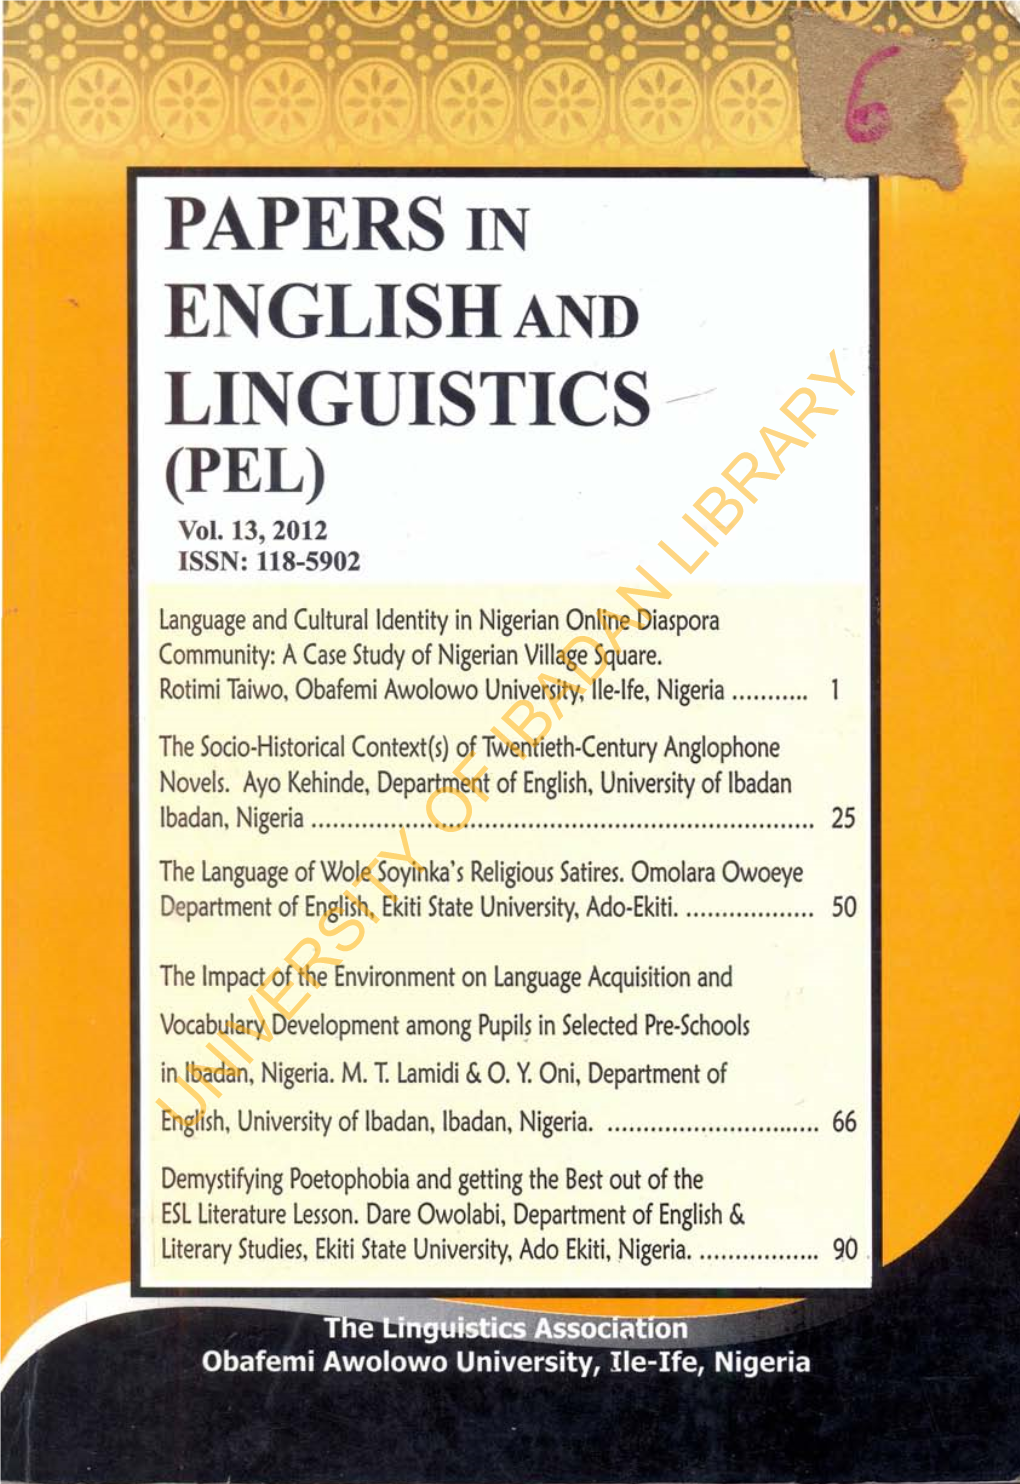 PAPERS in ENGLISH and LINGUISTICS --/ (PEL) Vol